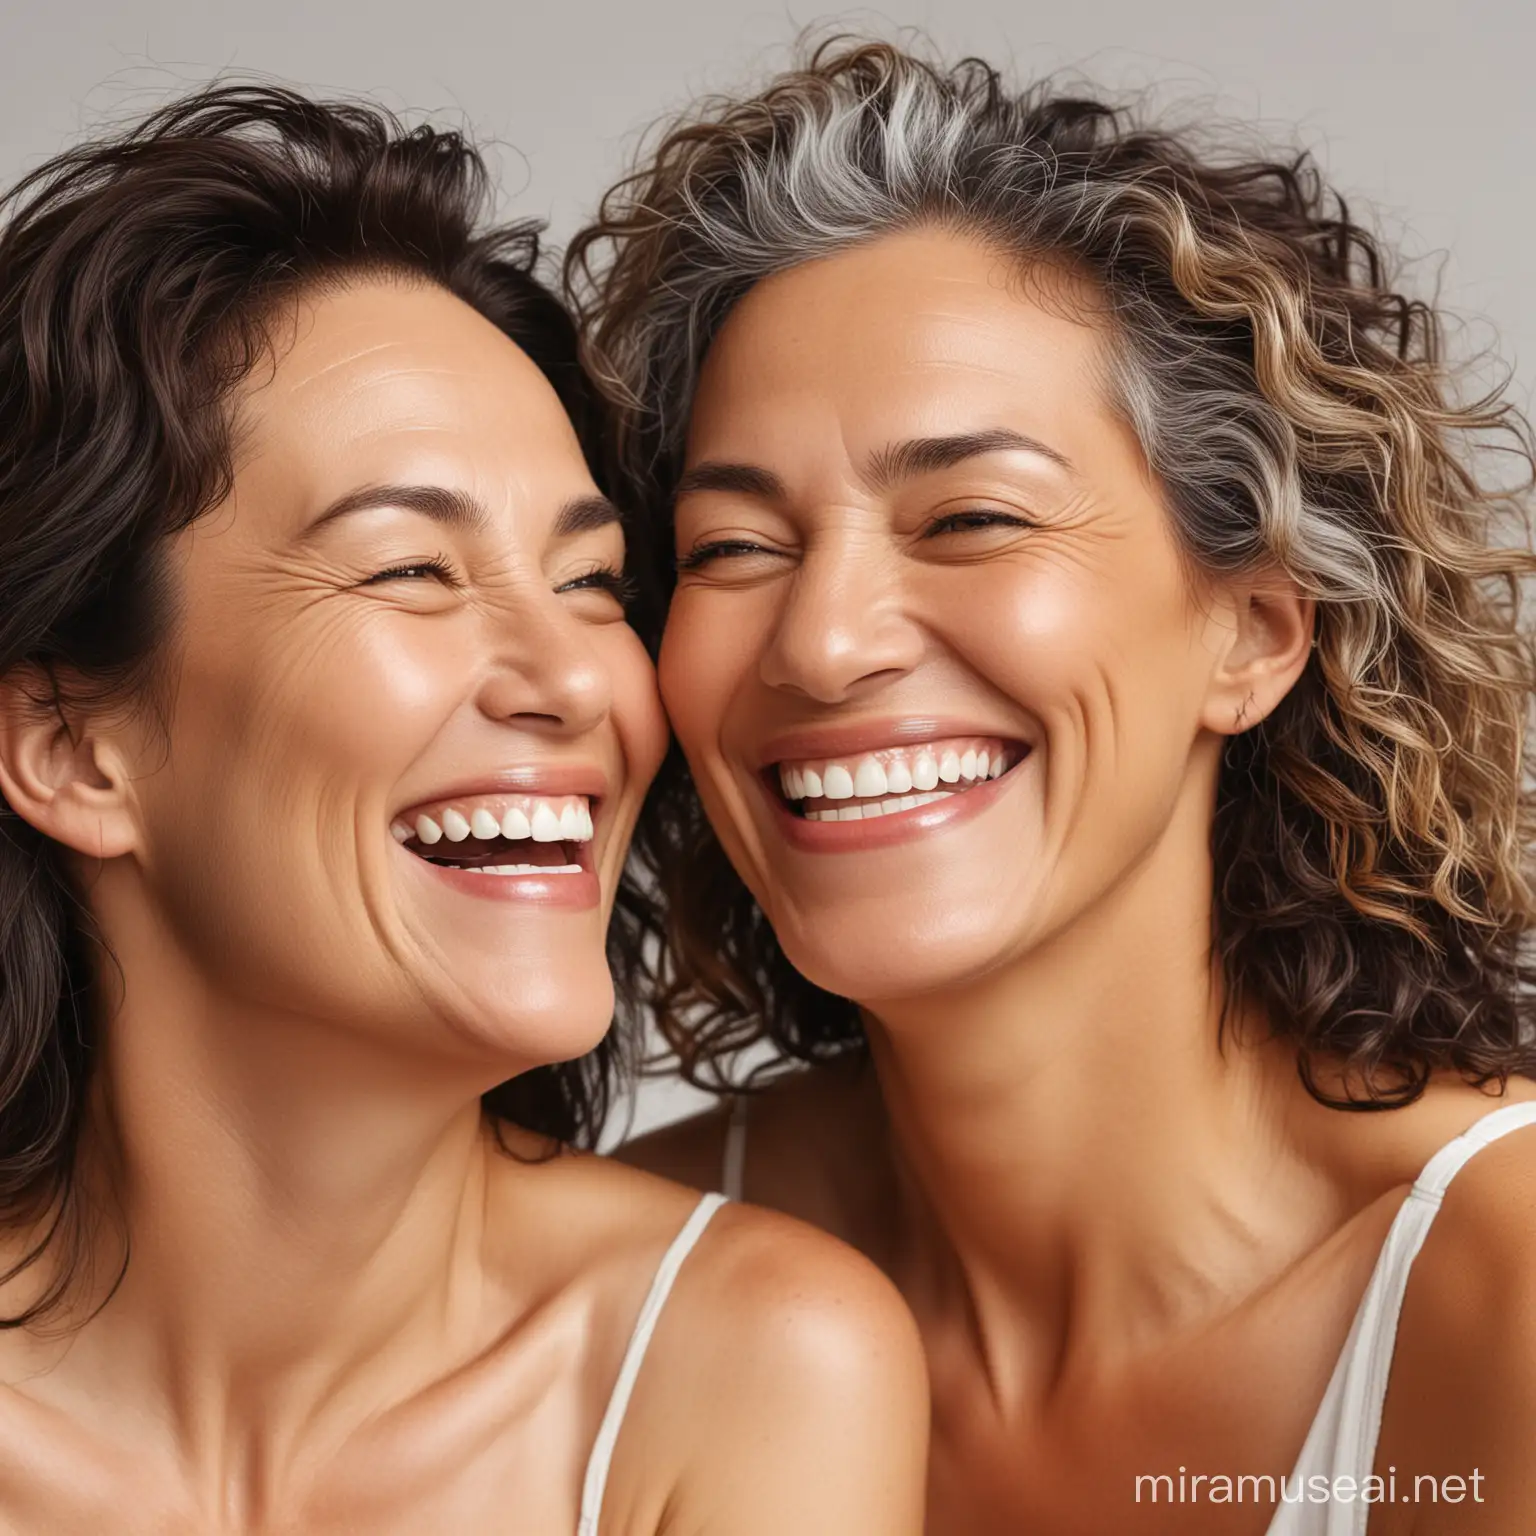 Diverse MiddleAged Women Sharing Laughter and Radiant Smiles